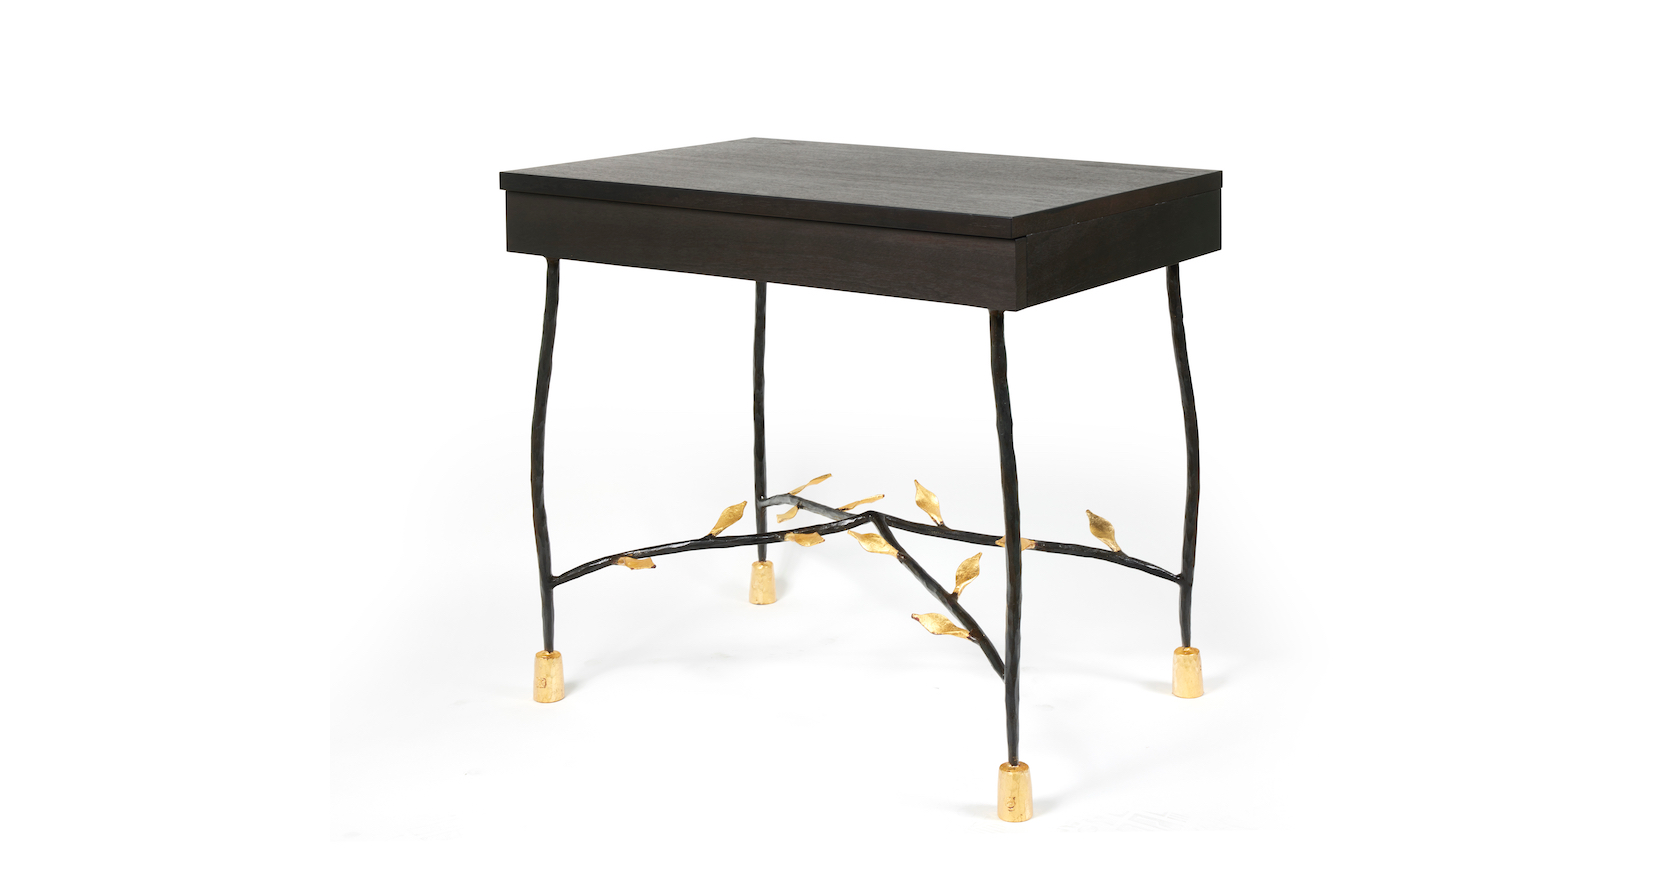 Garouste Bonetti, rectangular small table, legs in brown wrought iron with gold leaves, and a dark wood top